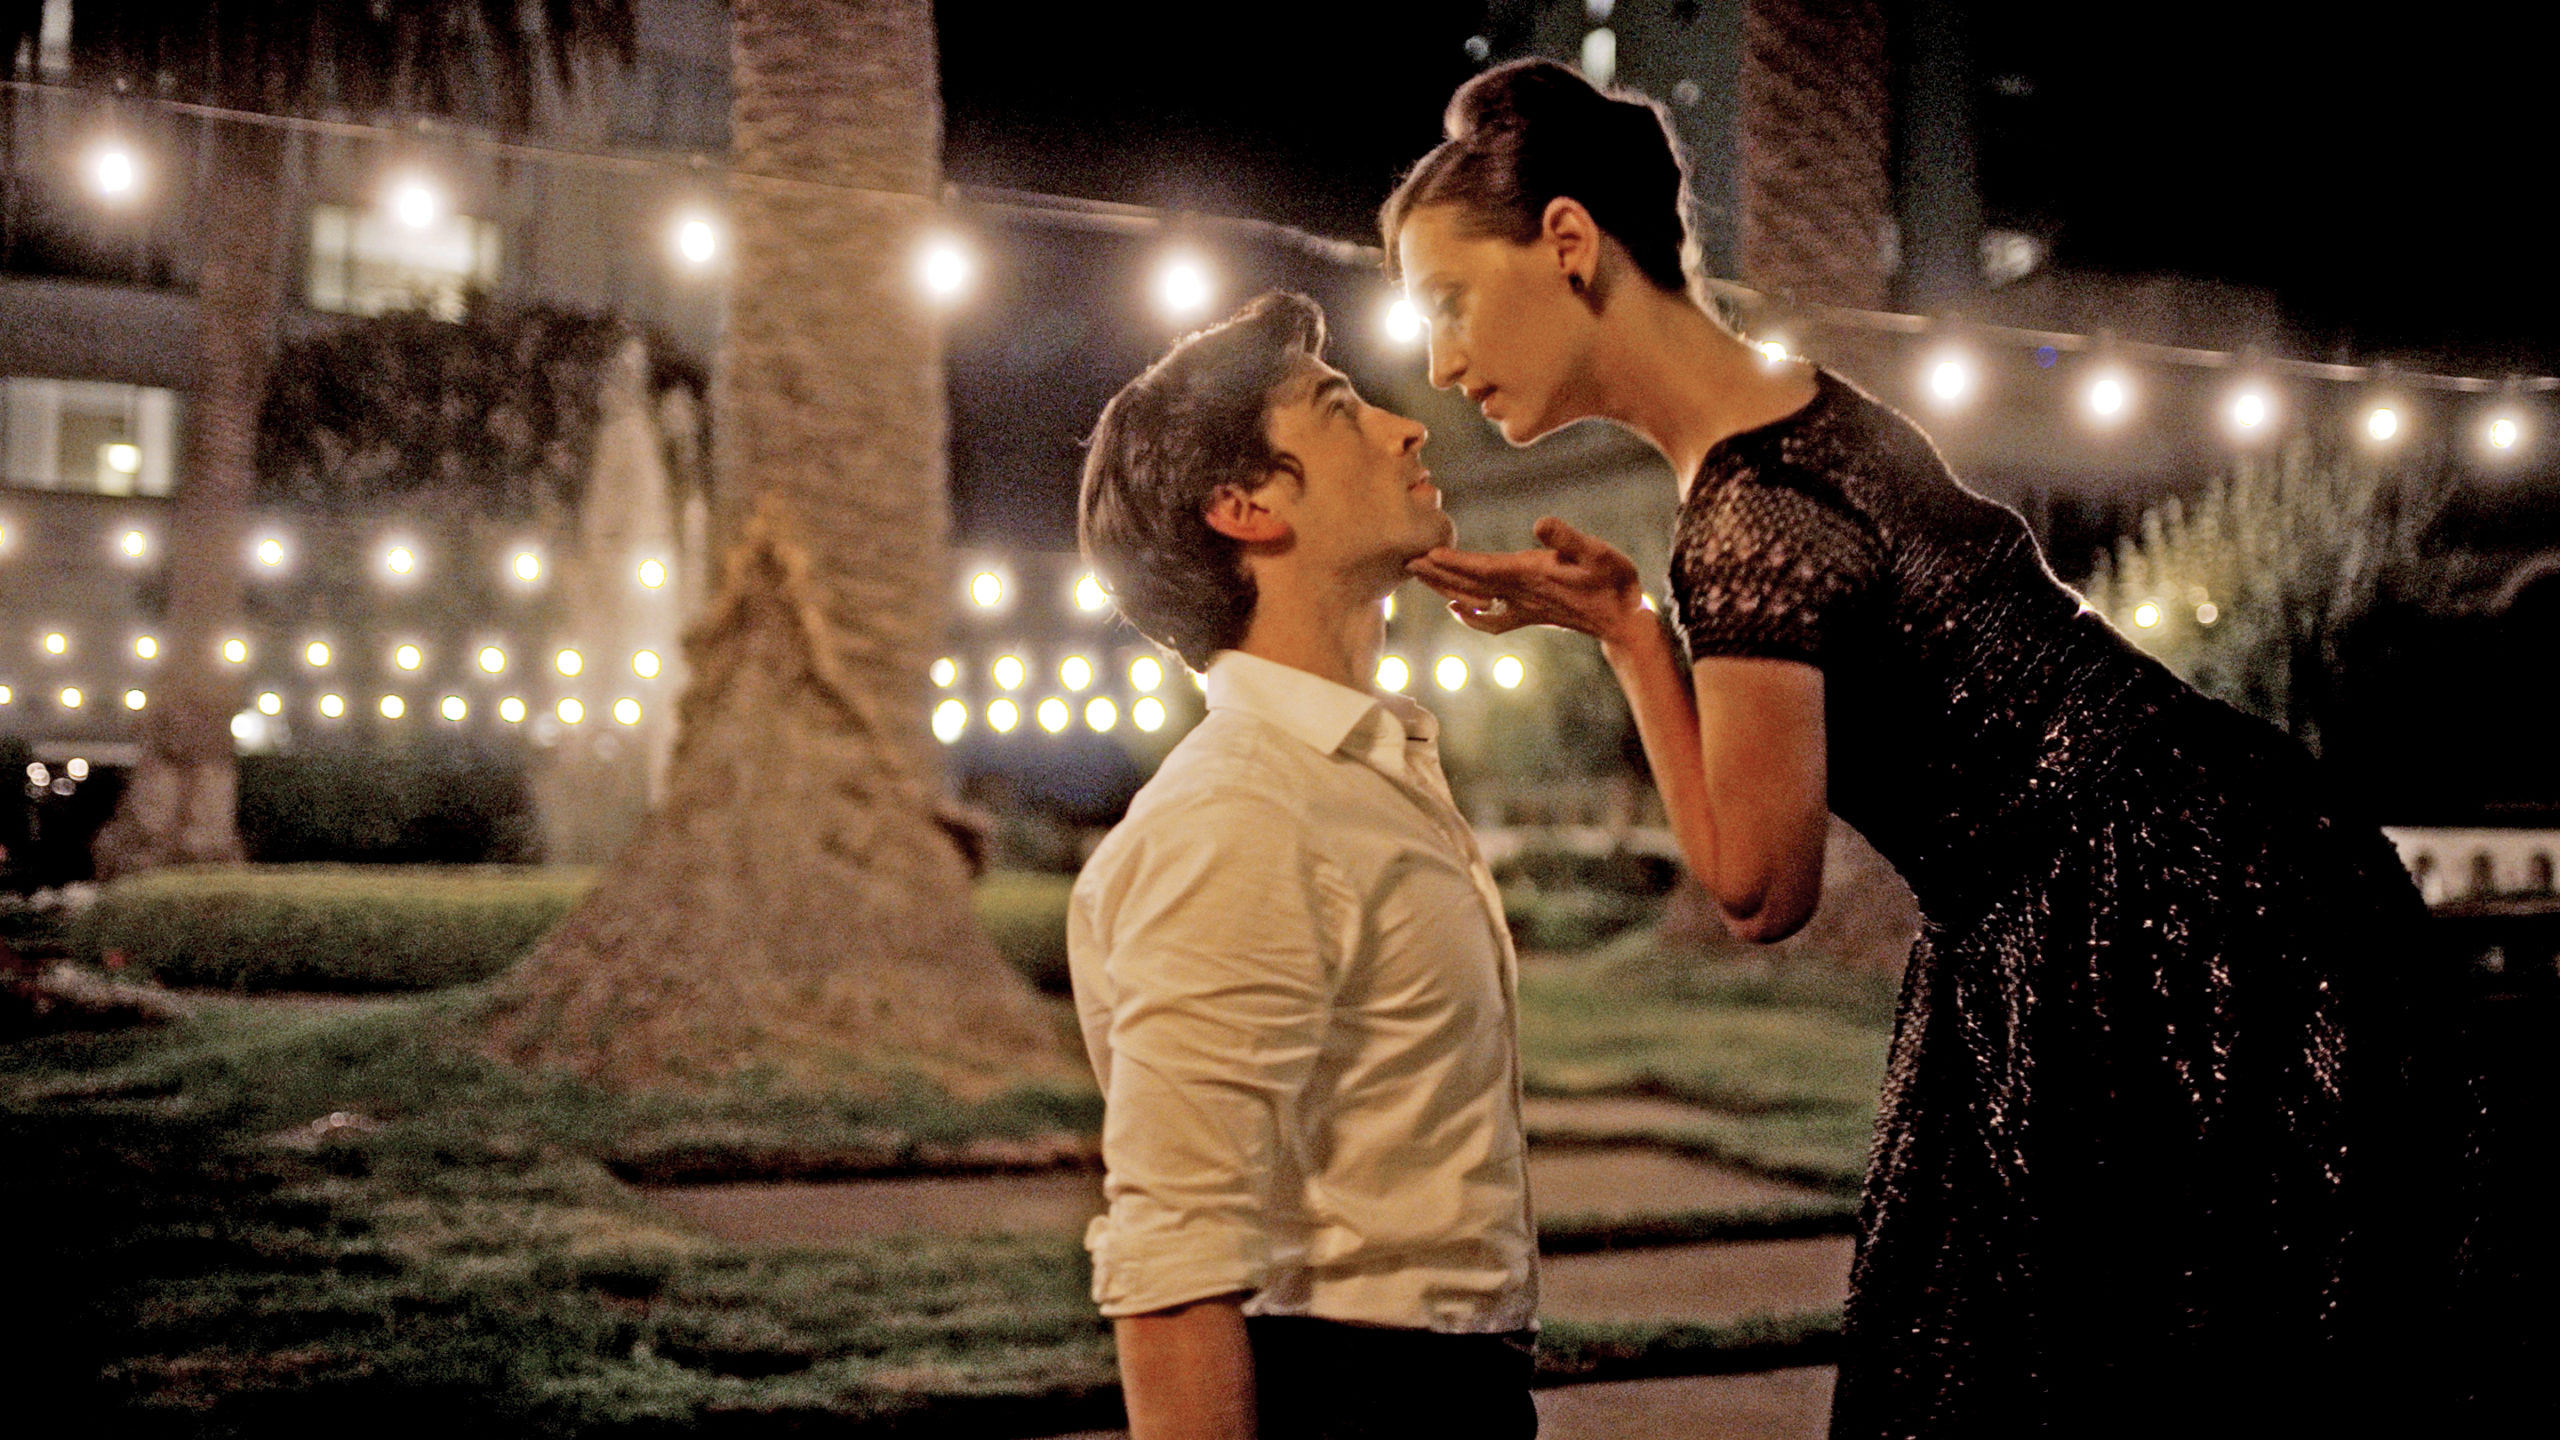 In a palm-tree lined courtyard at night, Joseph Walsh kneels onto the ground while Sarah Van Patten stands and bends towards him, lifting his chin with her left hand and looking into his eyes. Walsh wears a white button-down shirt, while Van Patten is shown in a lacy black dress, her hair in a French twist.